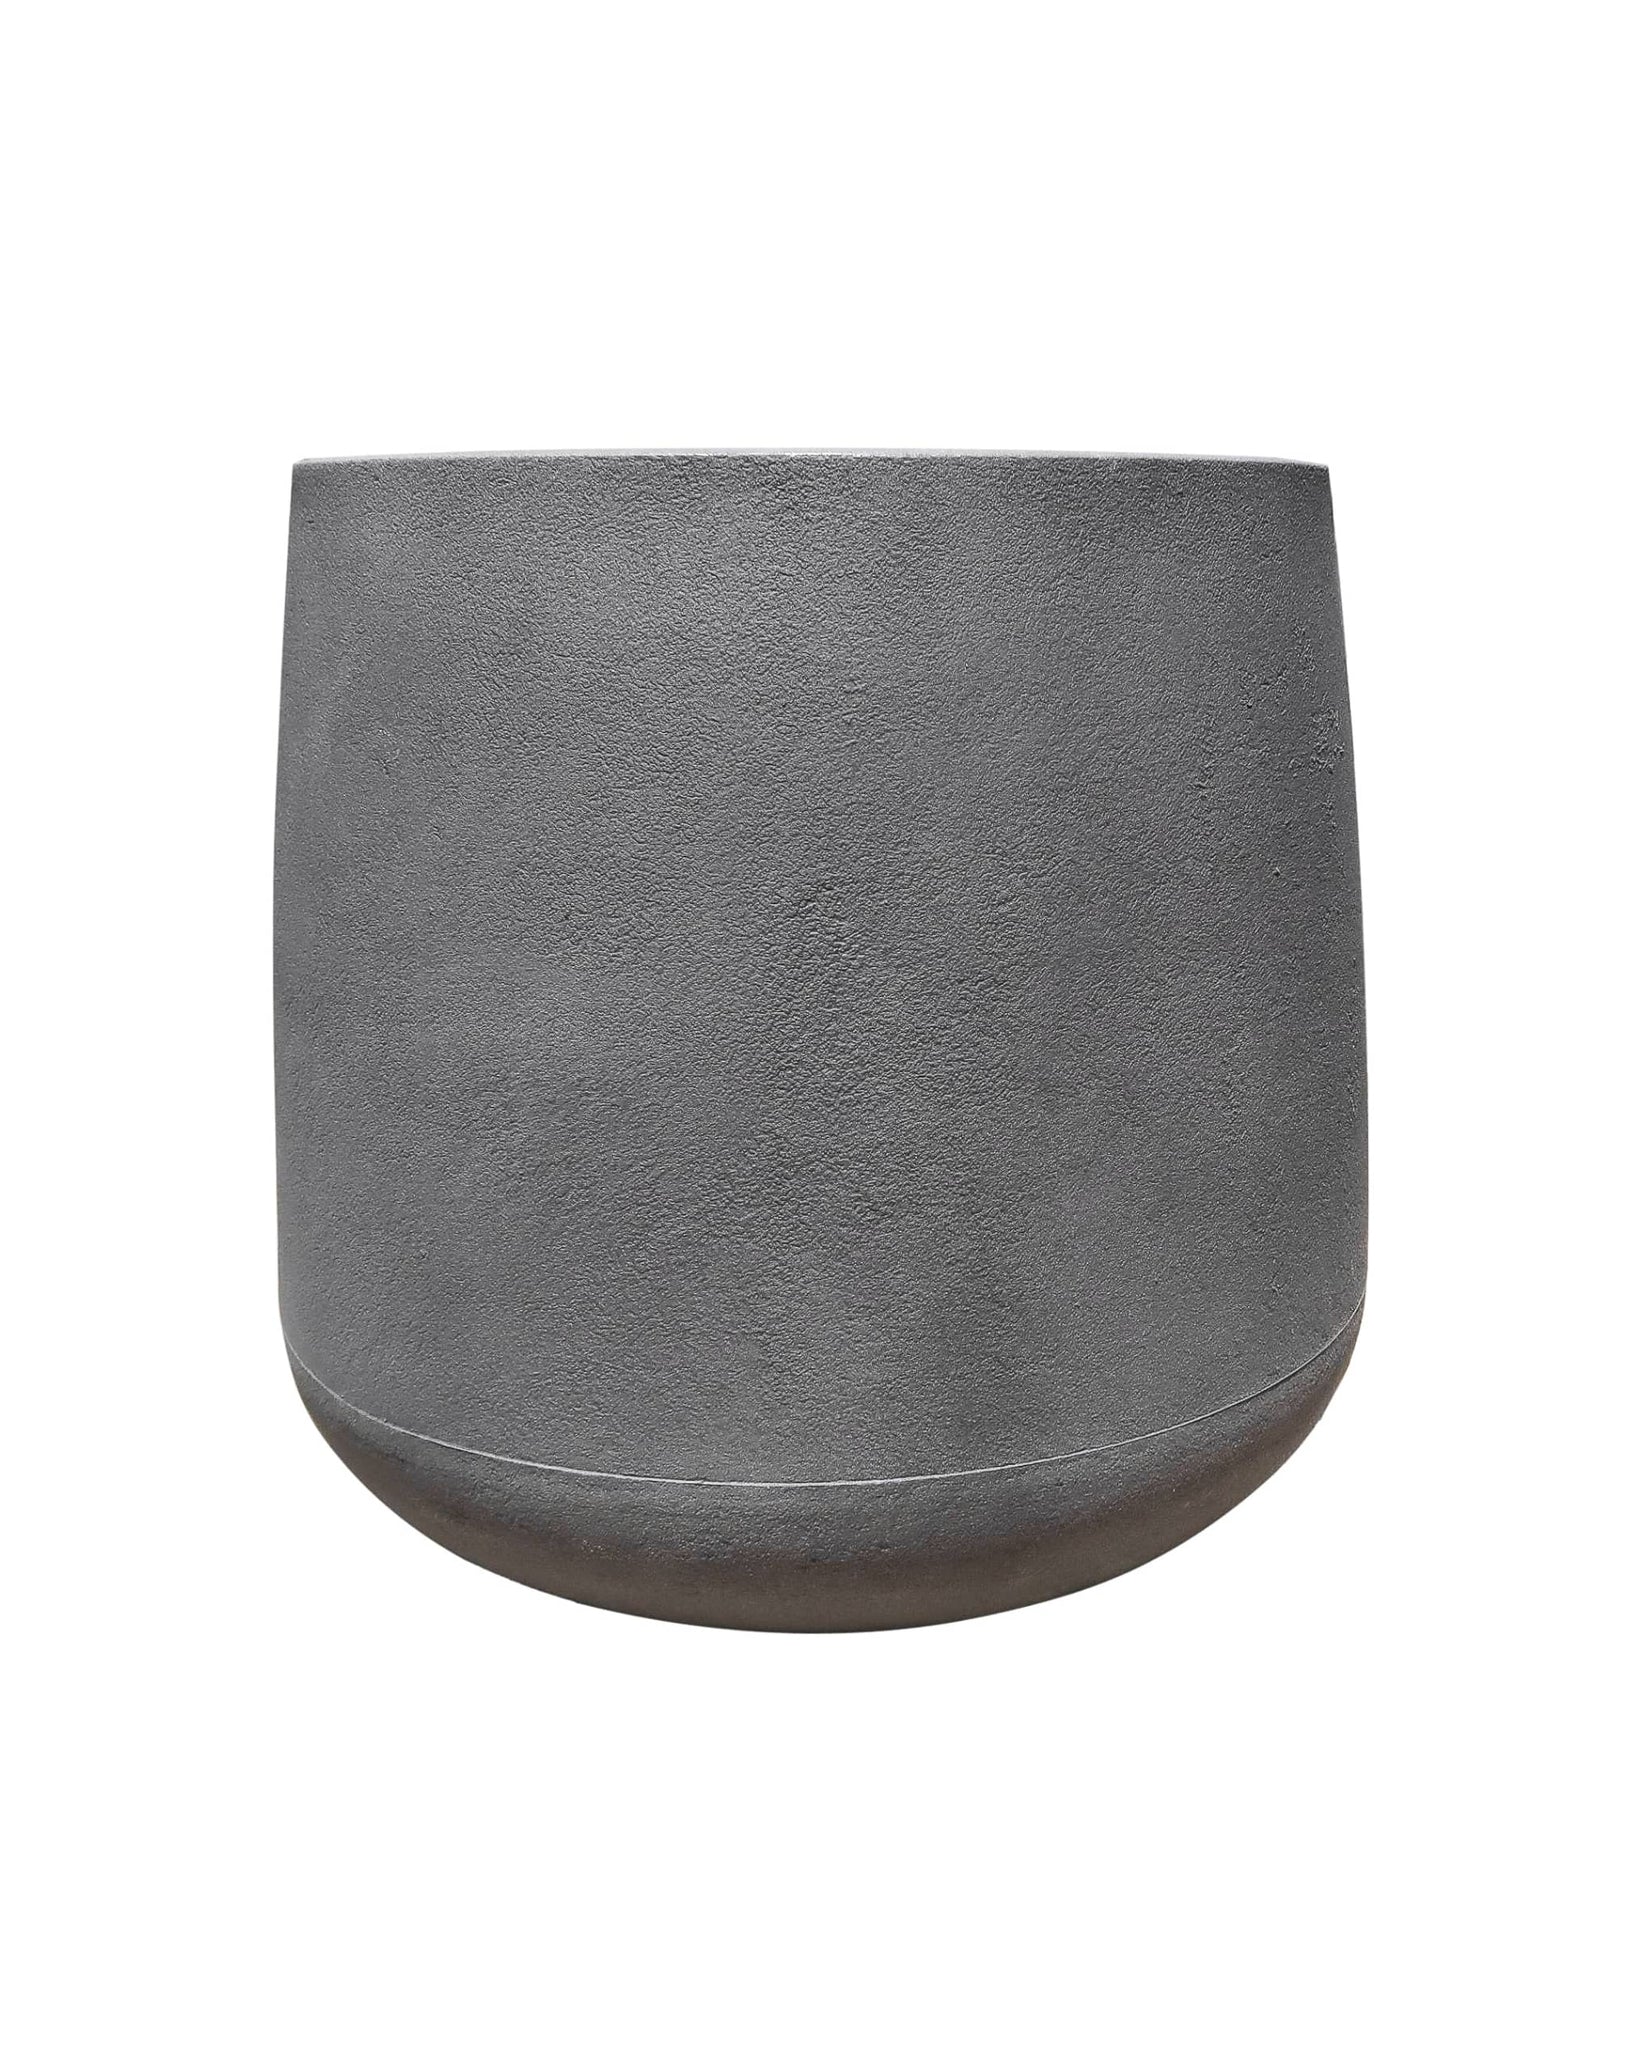 Side view of the medium Bios Japi plant pot, by Florastyle by Hingham, showing the beautiful textured finish and clean straight upright lines of the pot in colour Black Slate